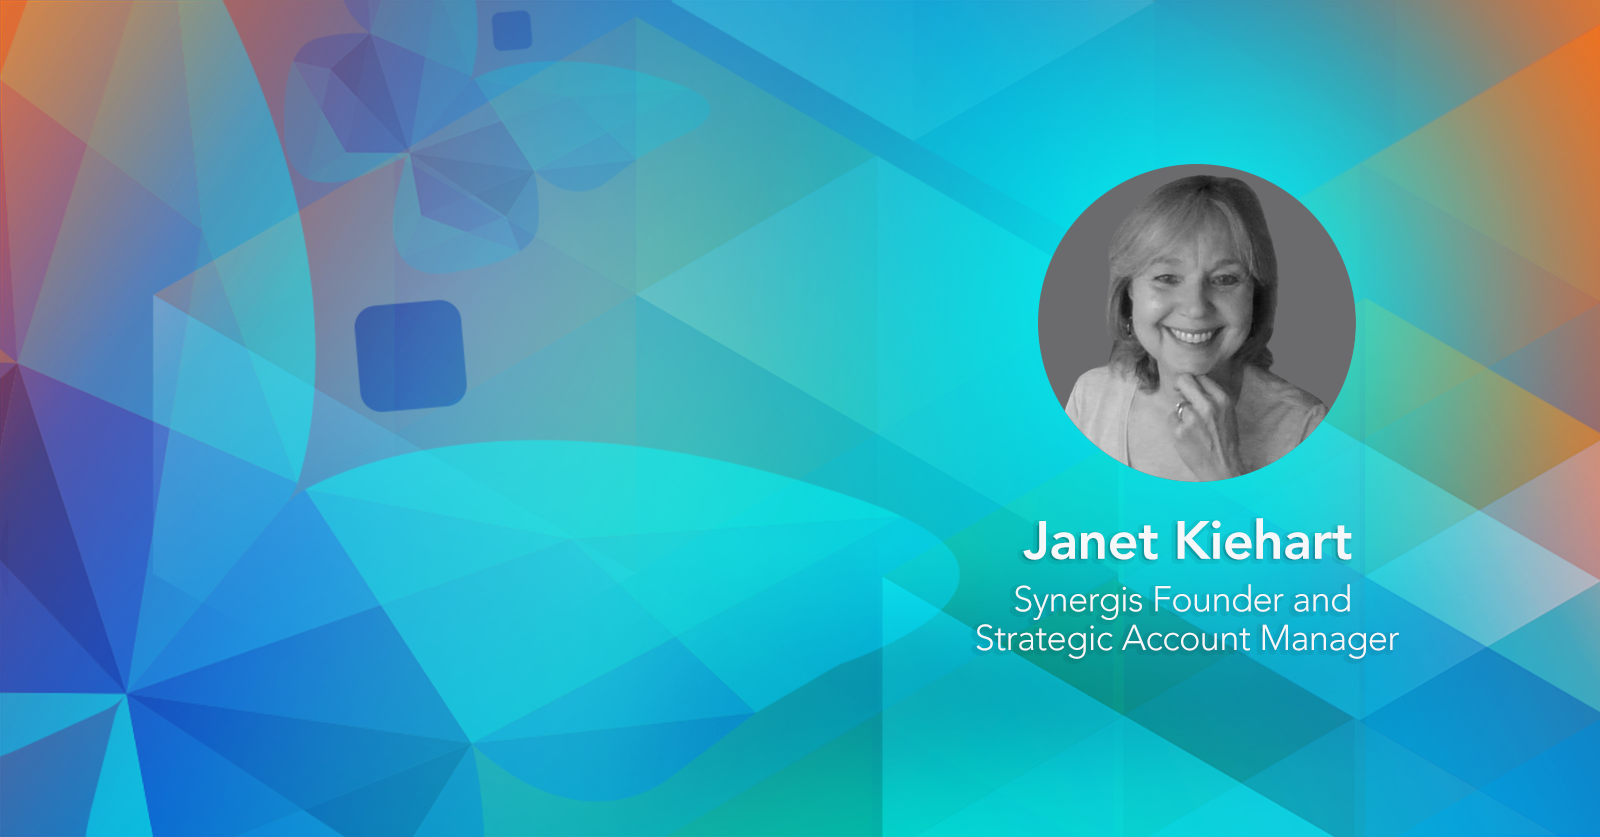 Janet Kiehart – Synergis Founder and Strategic Account Manager